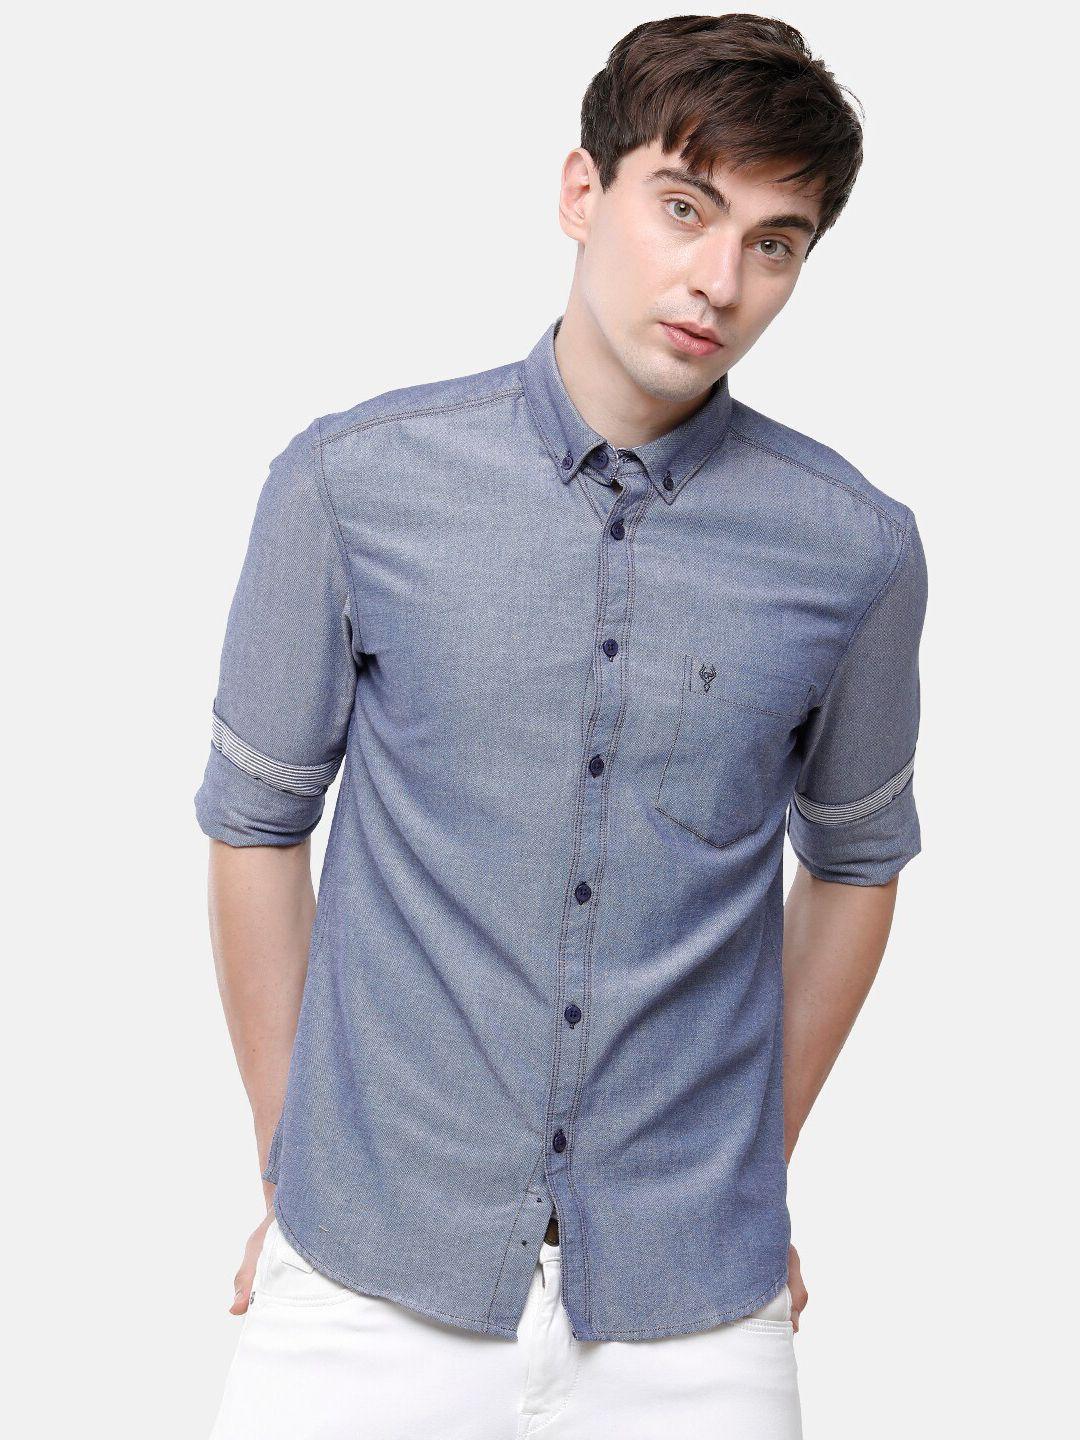 classic polo men navy blue slim fit casual shirt